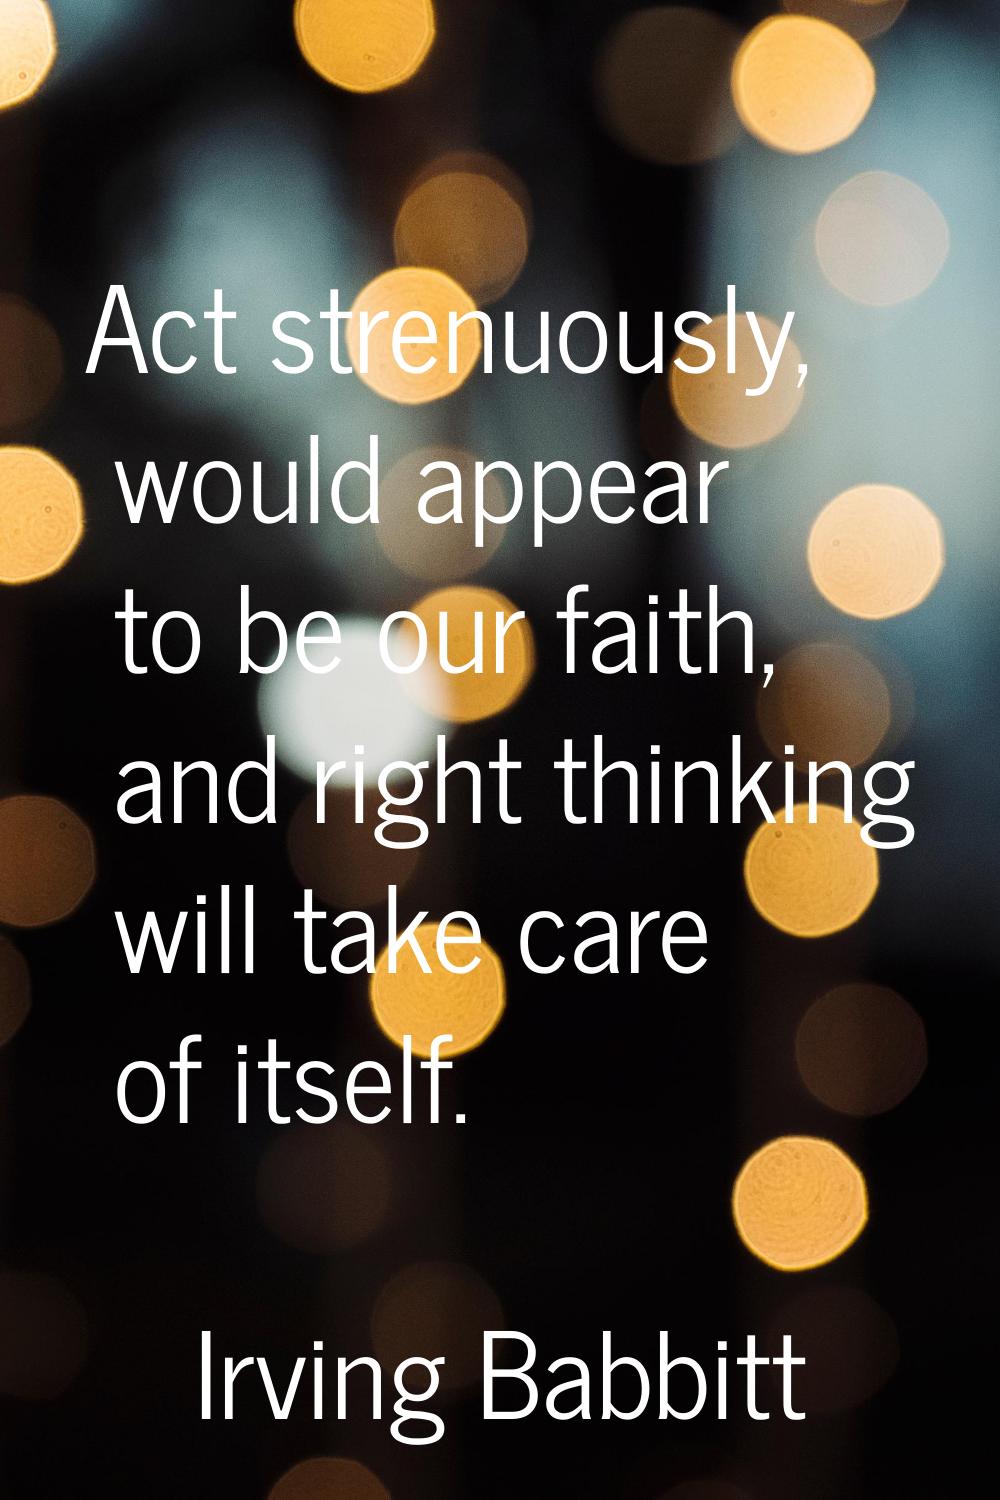 Act strenuously, would appear to be our faith, and right thinking will take care of itself.